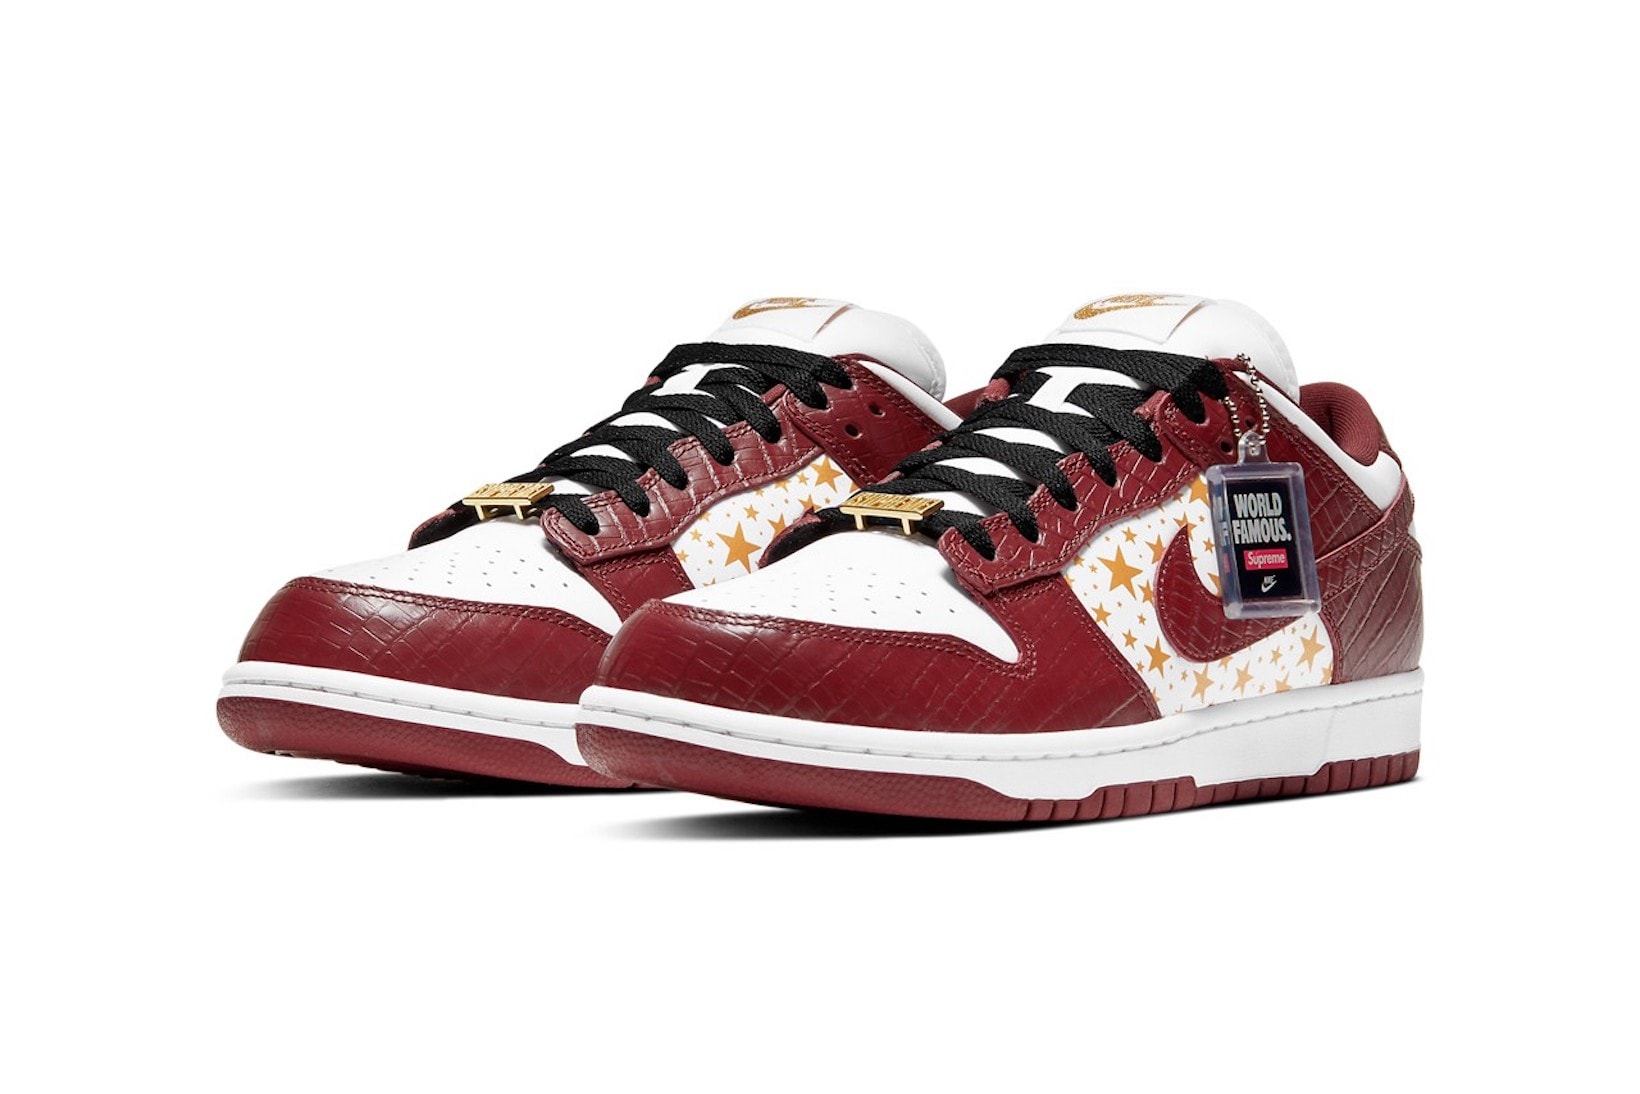 supreme nike sb dunk low collaboration sneakers barkroot brown burgundy red white gold logo stars lateral black laces